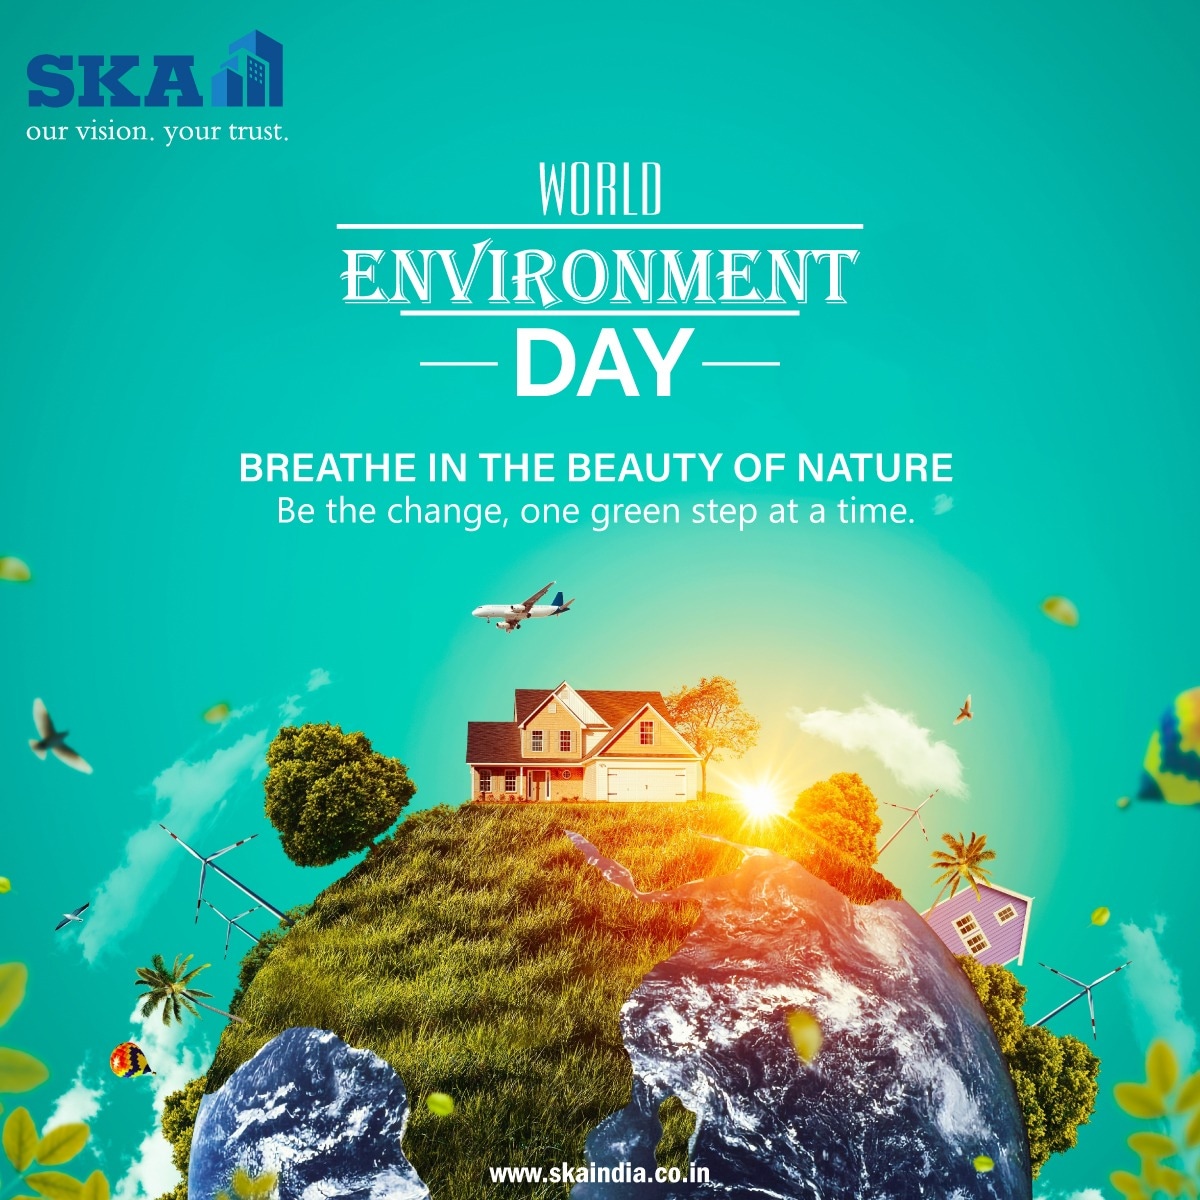 Happy World Environment Day! Let's come together and celebrate the beauty of our planet.
.
.
#WorldEnvironmentDay2023 #greenfuture #cleanfuture #SKA #SKAgroup #SKAGroupIndia #realestate #luxuryliving #GreenLiving #PlanetFirst #LoveEarth #ClimateAction #GoGreen #EcoLifestyle